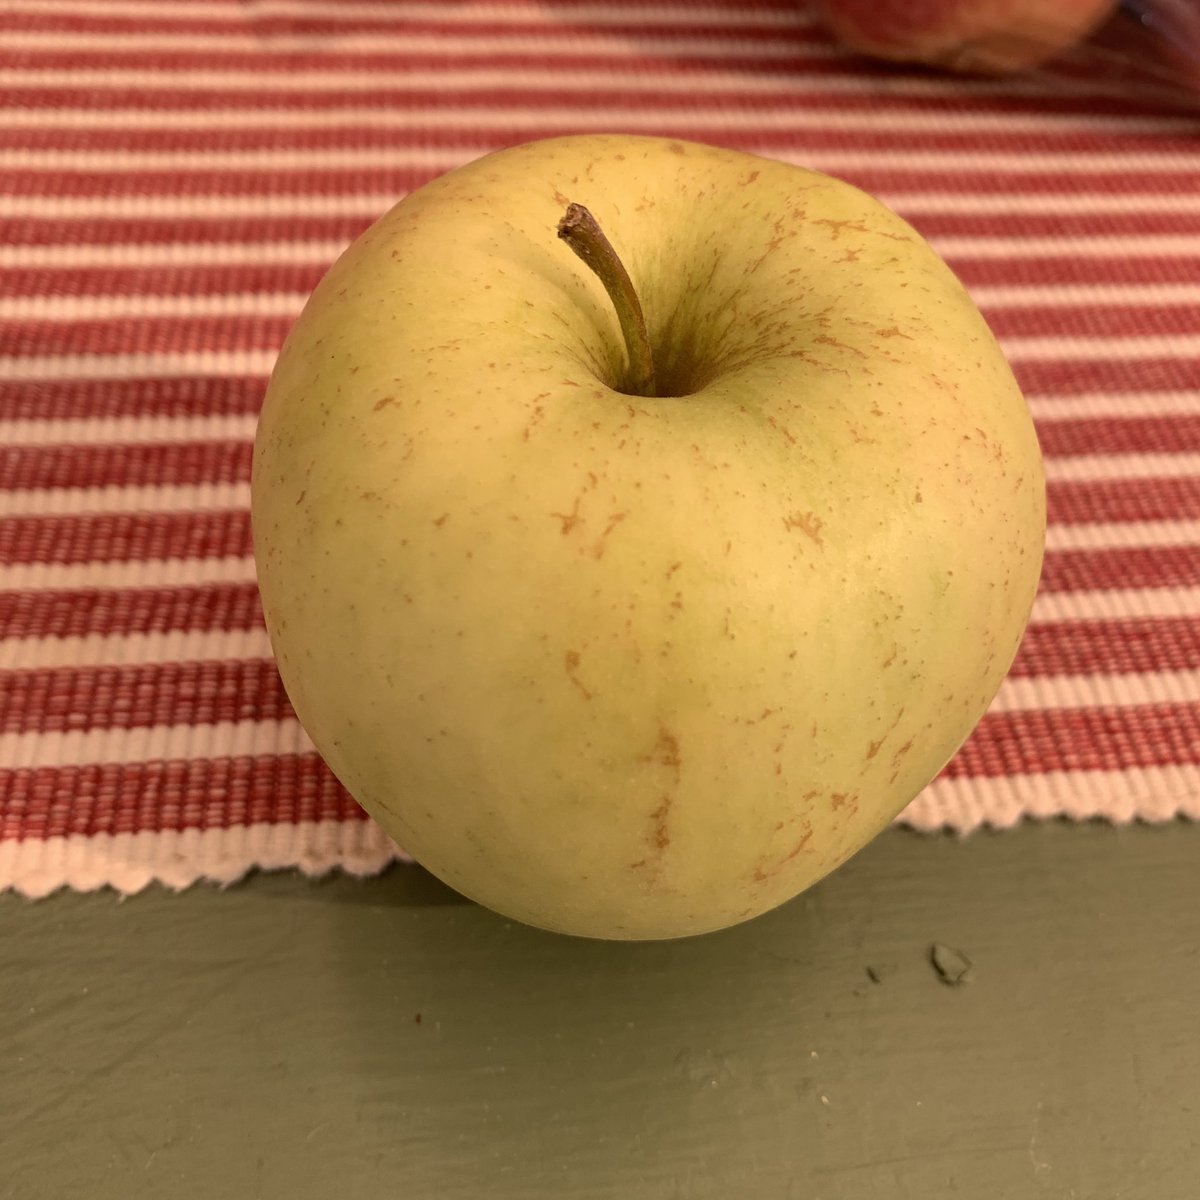 Golden Delicious, 19th century — not related to Red Delicious, rather, Grimes Golden. Skin should be pale yellow - too green, it was picked too early - too yellow, it’s overripe. It has a nice crisp bite and a light, refreshing, almost melony taste. Bruises easily. 7/10